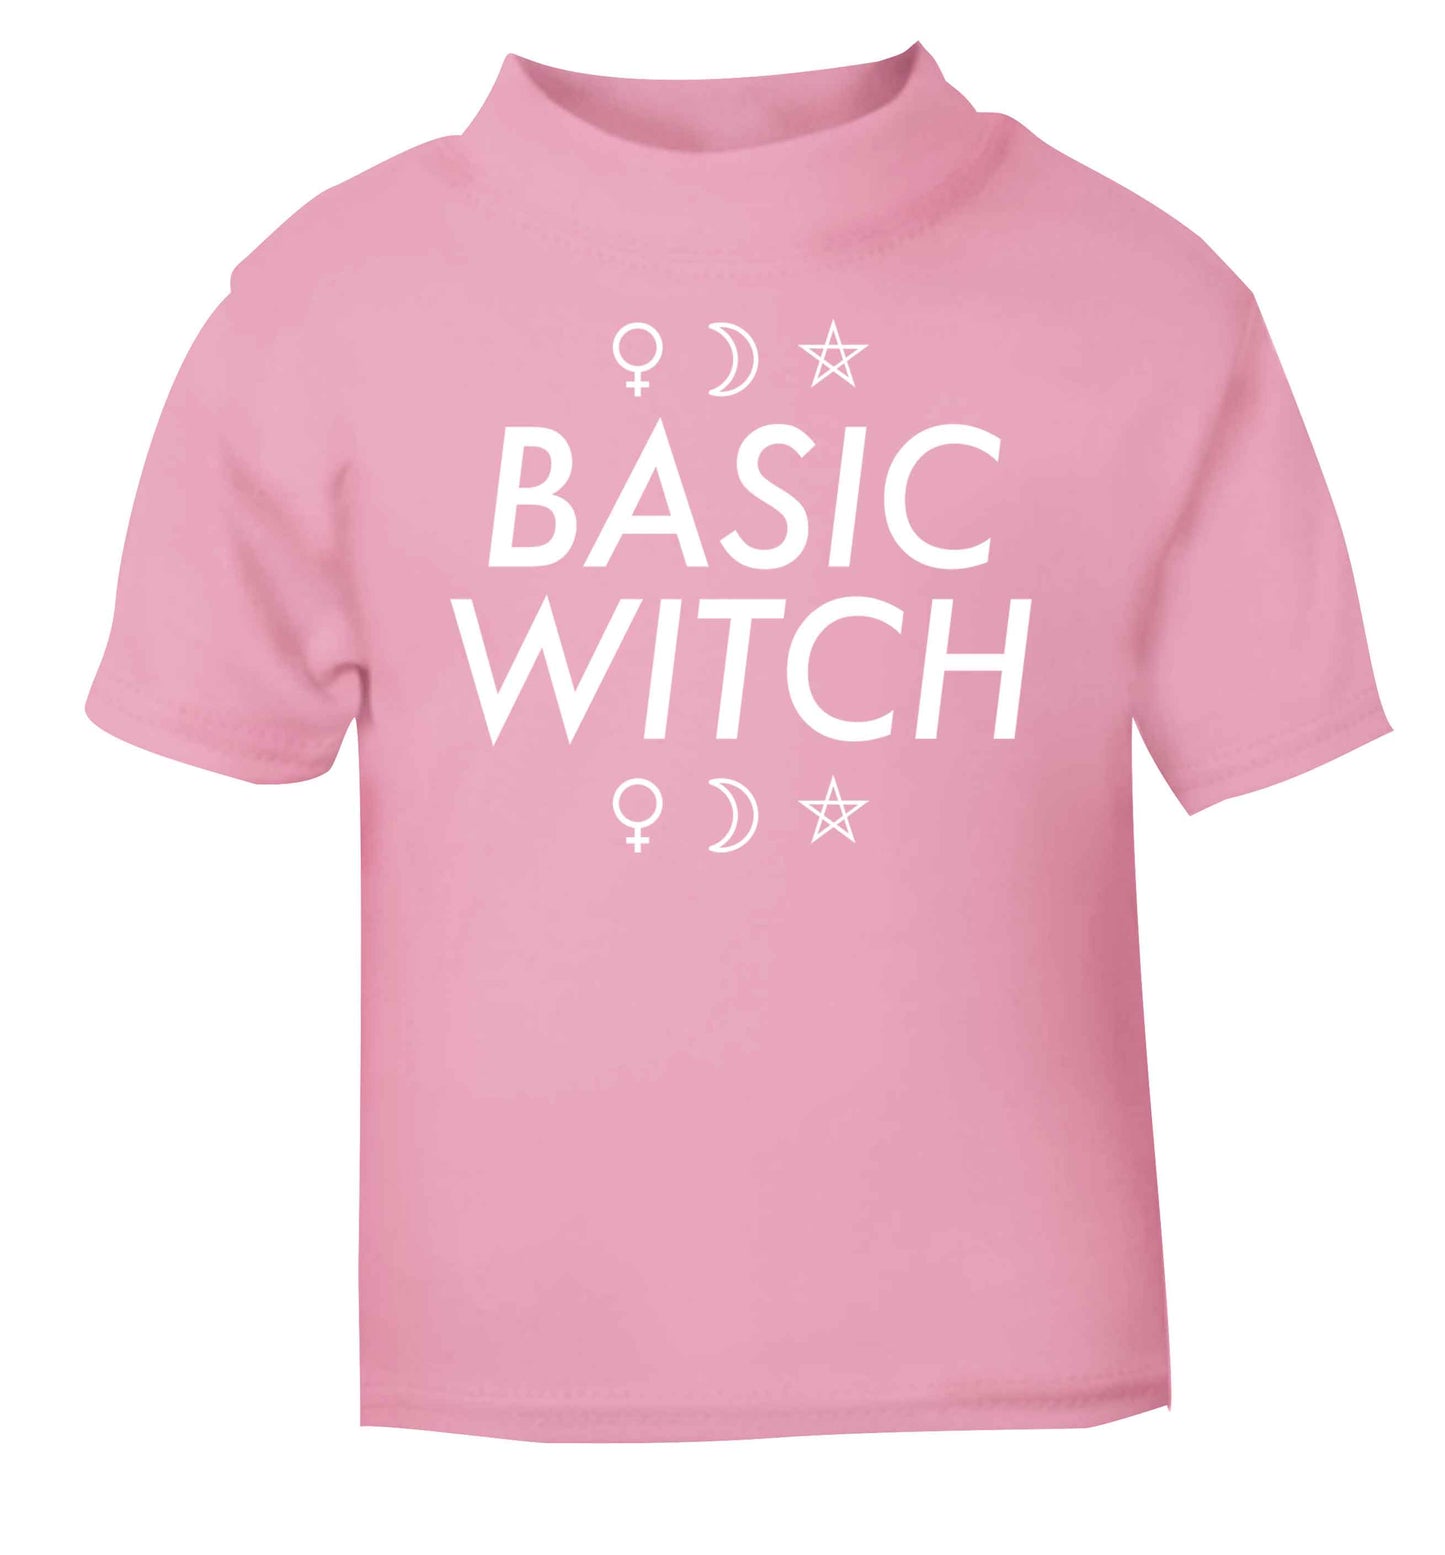 Basic witch 1 light pink baby toddler Tshirt 2 Years